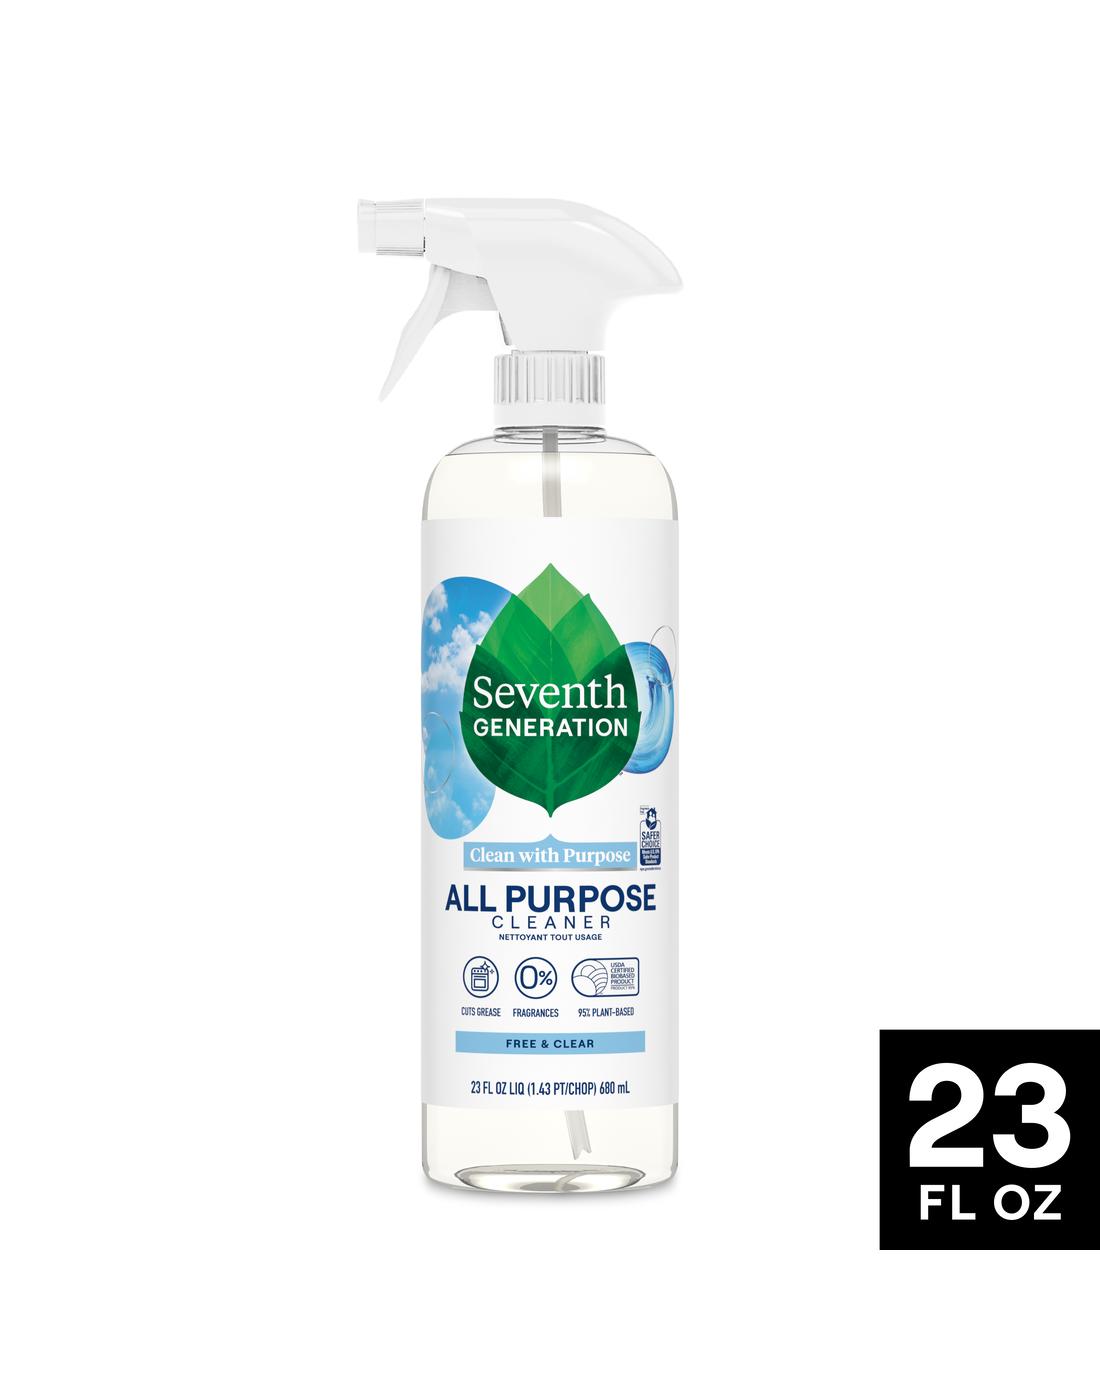 Seventh Generation Free & Clear All Purpose Cleaner; image 4 of 4